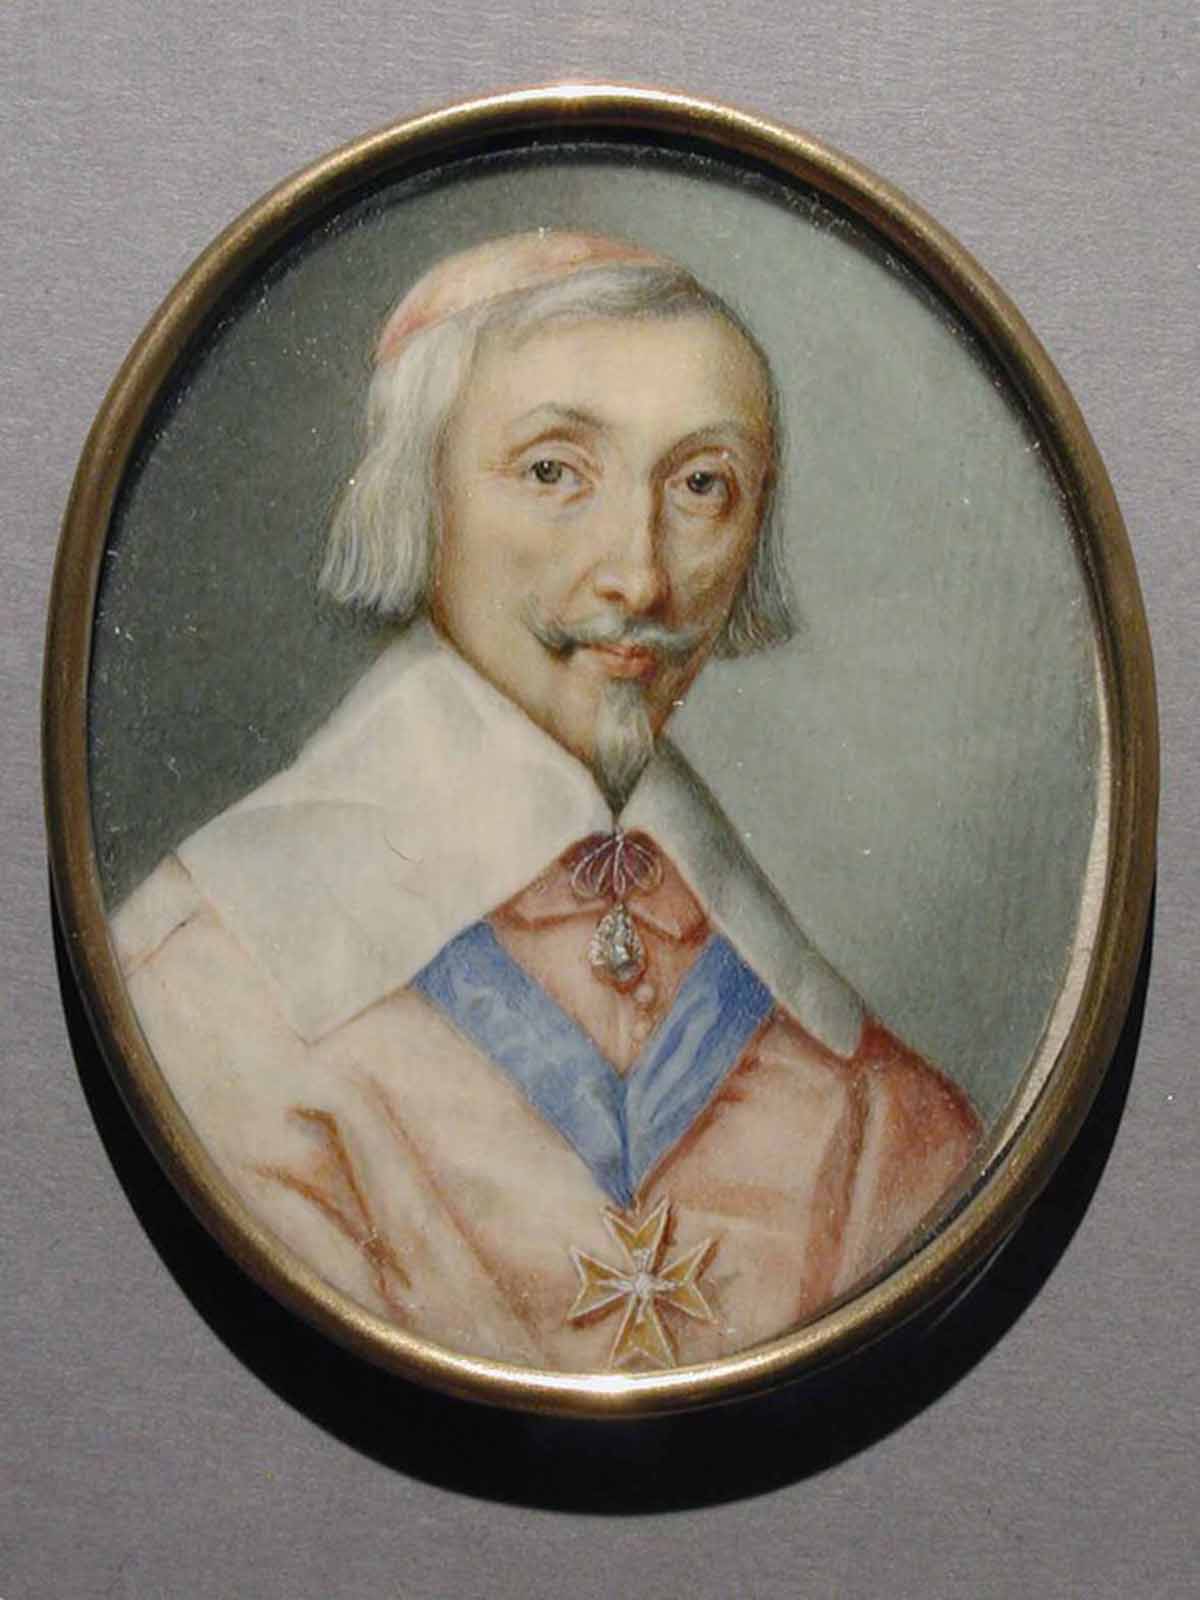 A miniature watercolor portrait of the French Cardinal Richelieu is painted on an oval-shaped piece of ivory with a gold frame.